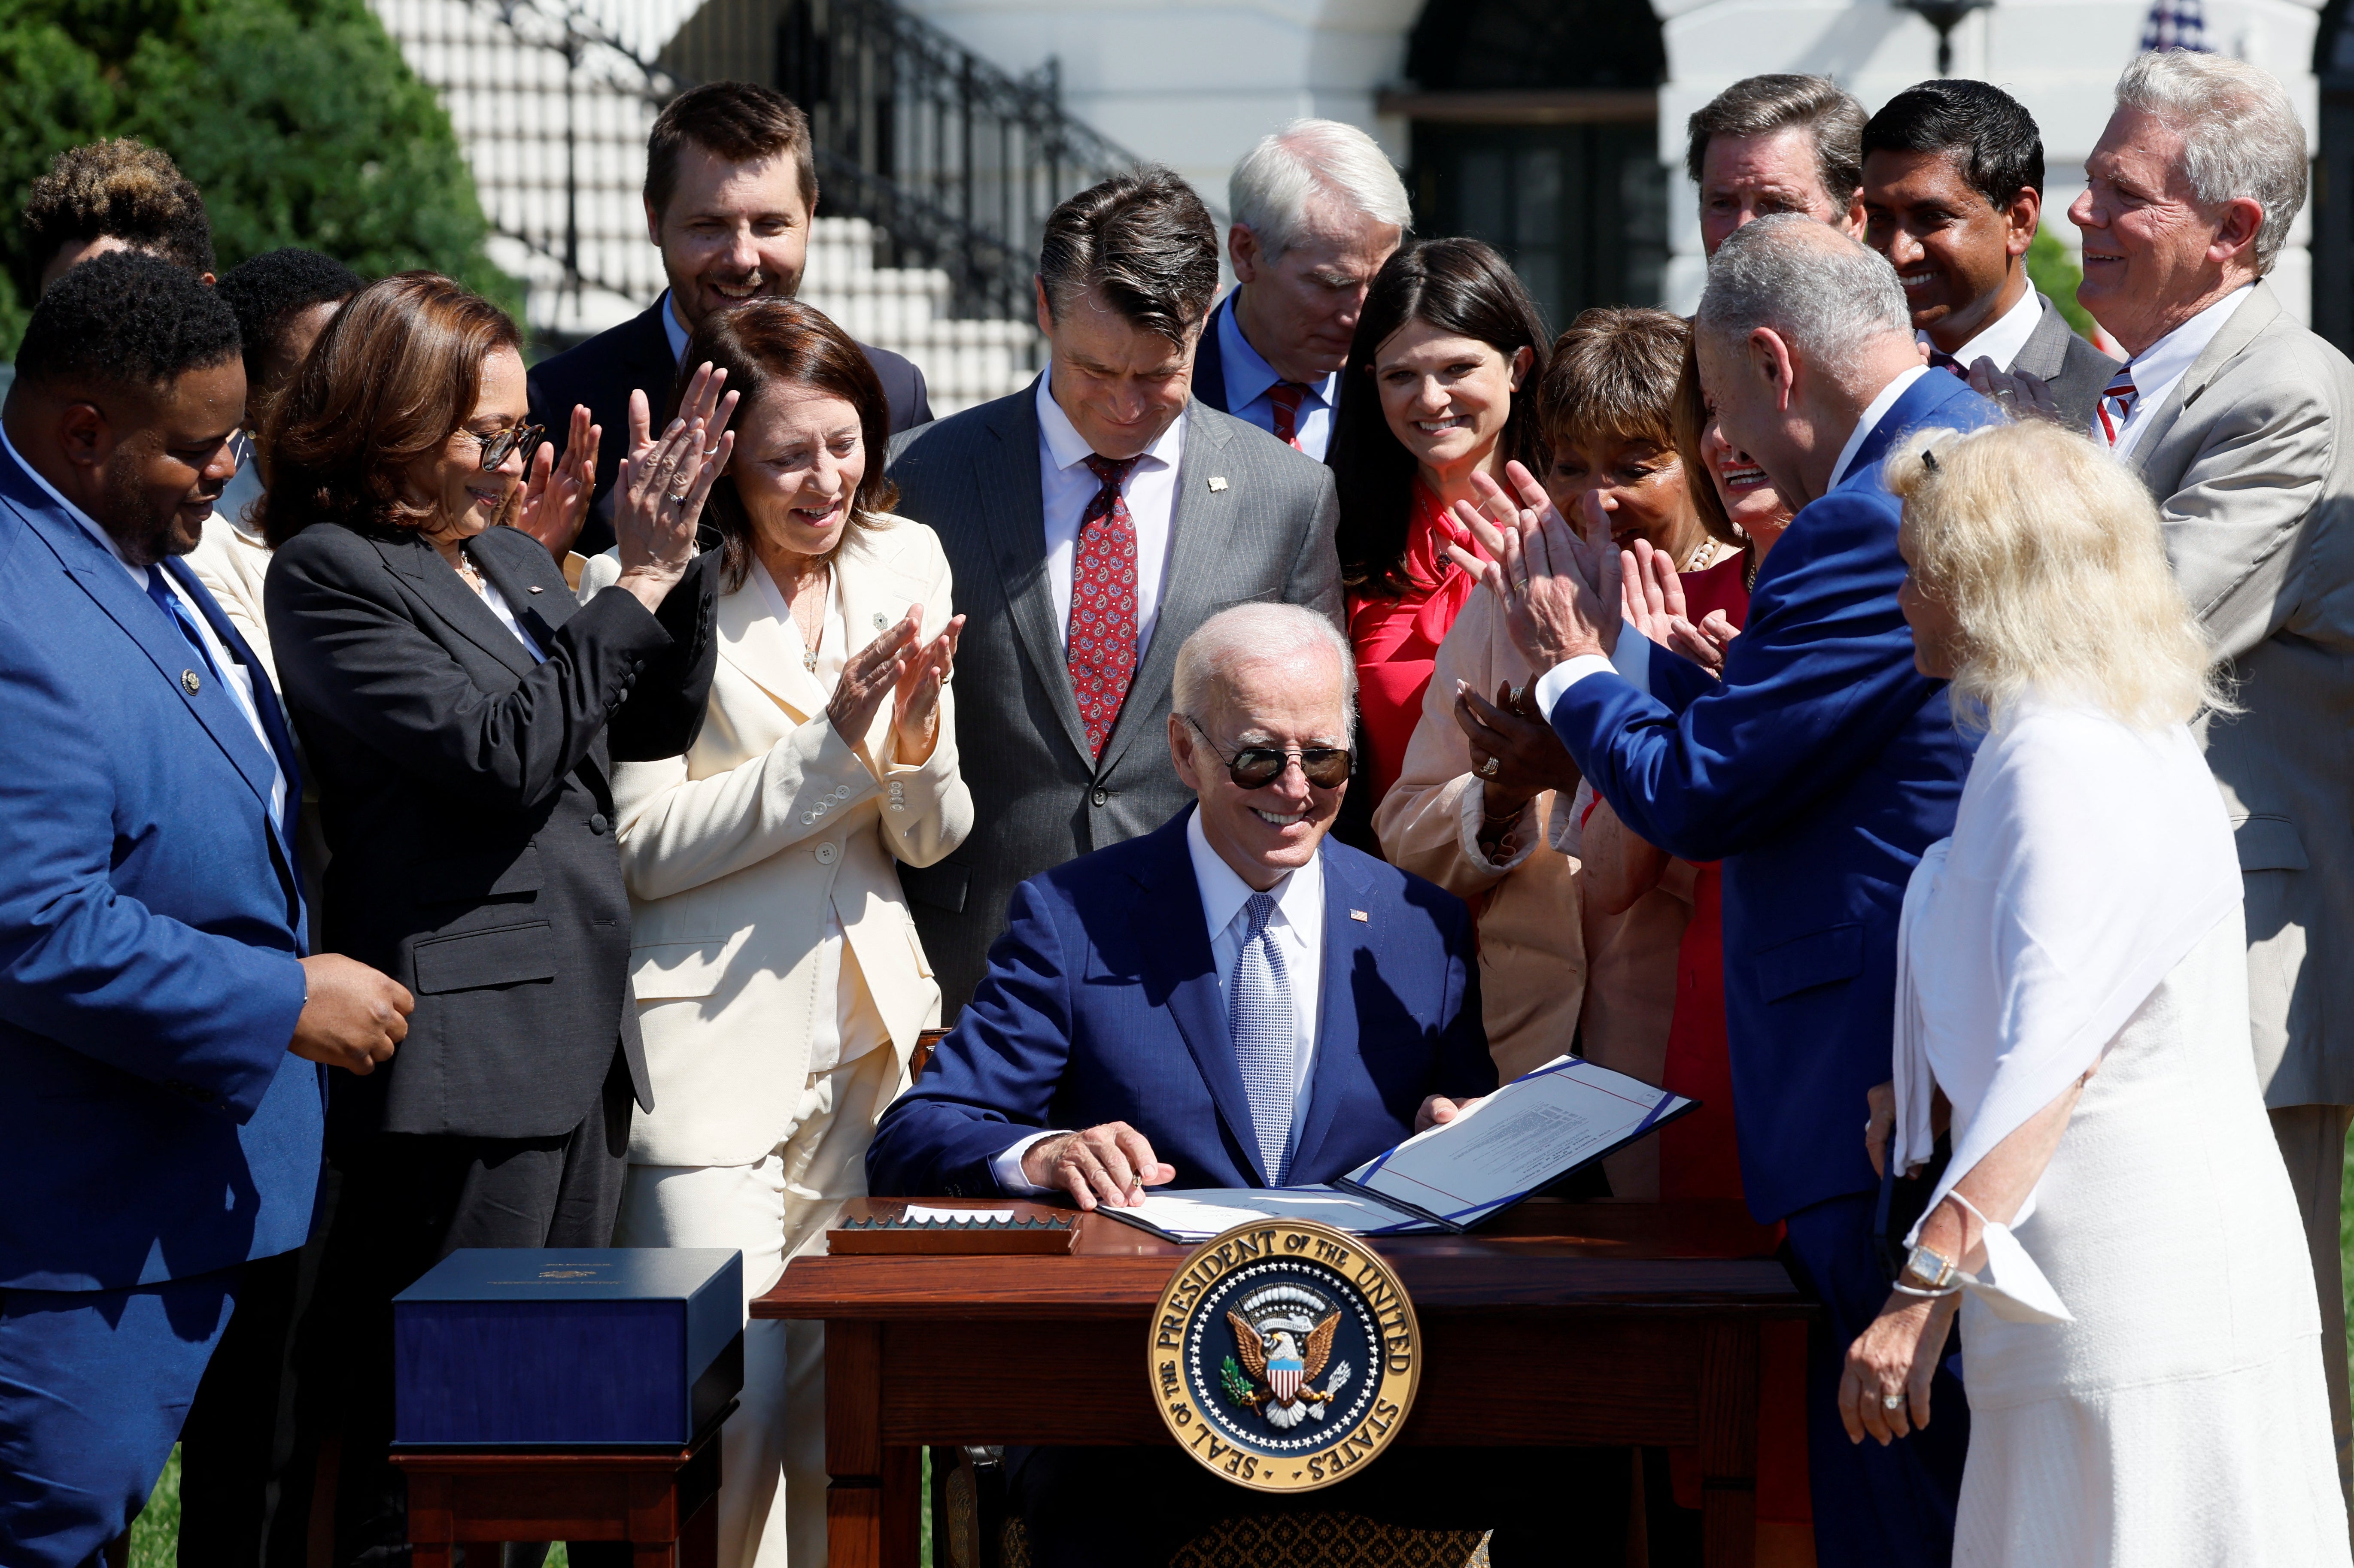 US president Joe Biden signs the CHIPS and Science Act of 2022 alongside vice president Kamala Harris, House of Representatives speaker Nancy Pelosi and Joshua Aviv, founder and CEO of SparkCharge, on the South Lawn of the White House in Washington, 9 August 2022